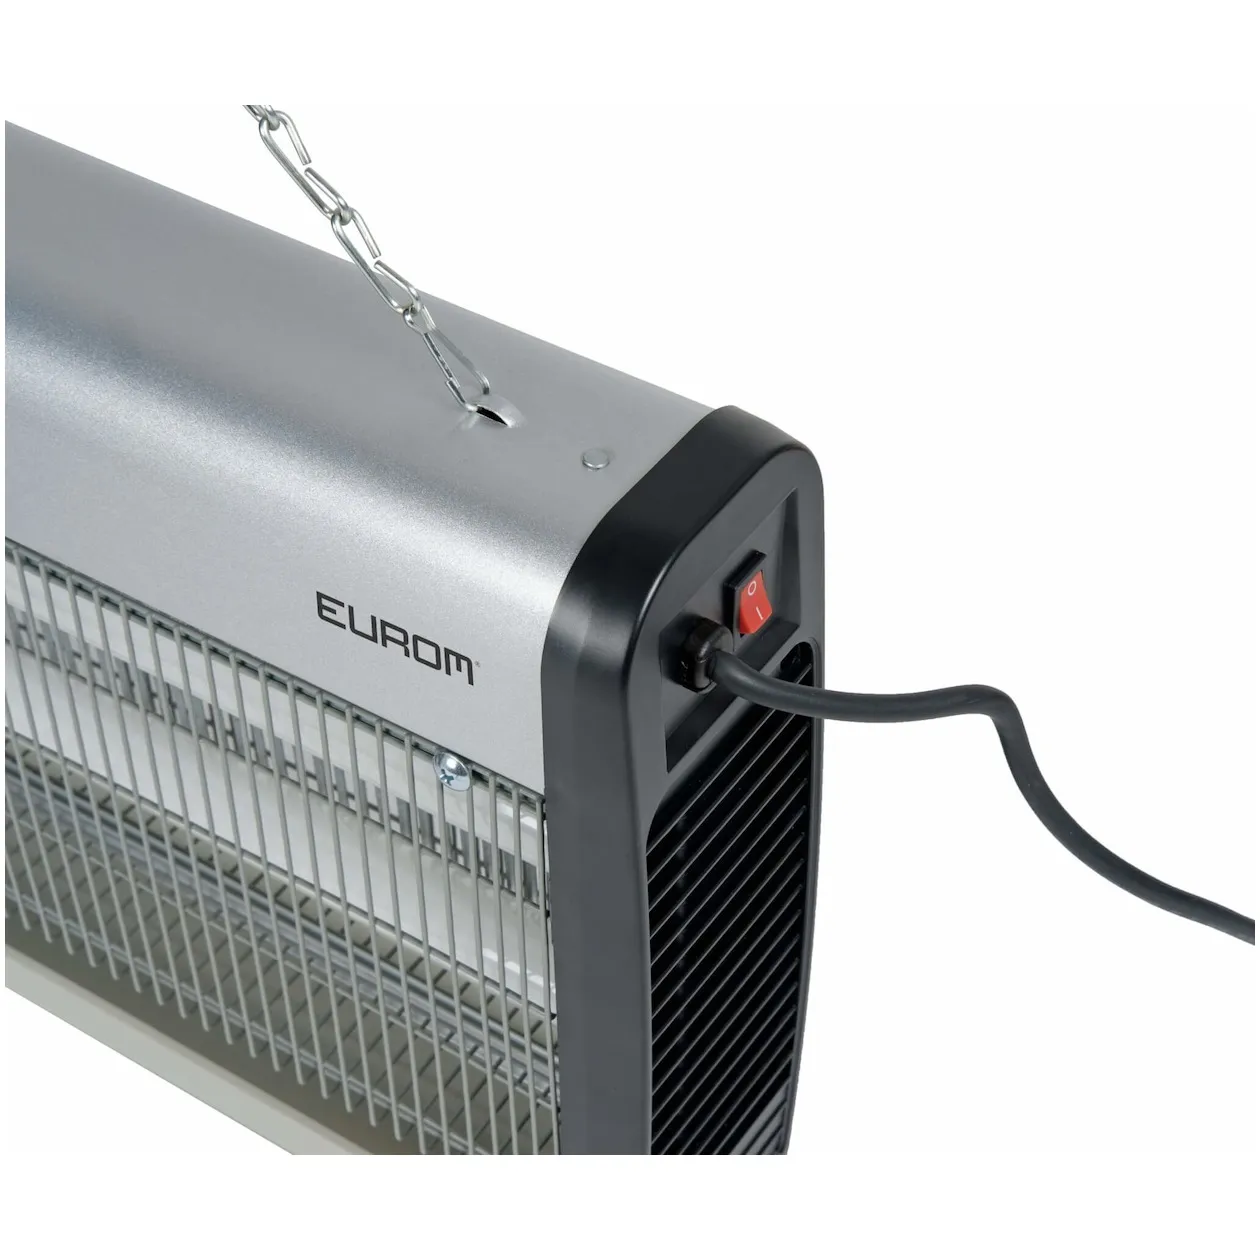 Eurom Fly Away metal 30-2 Insect killer